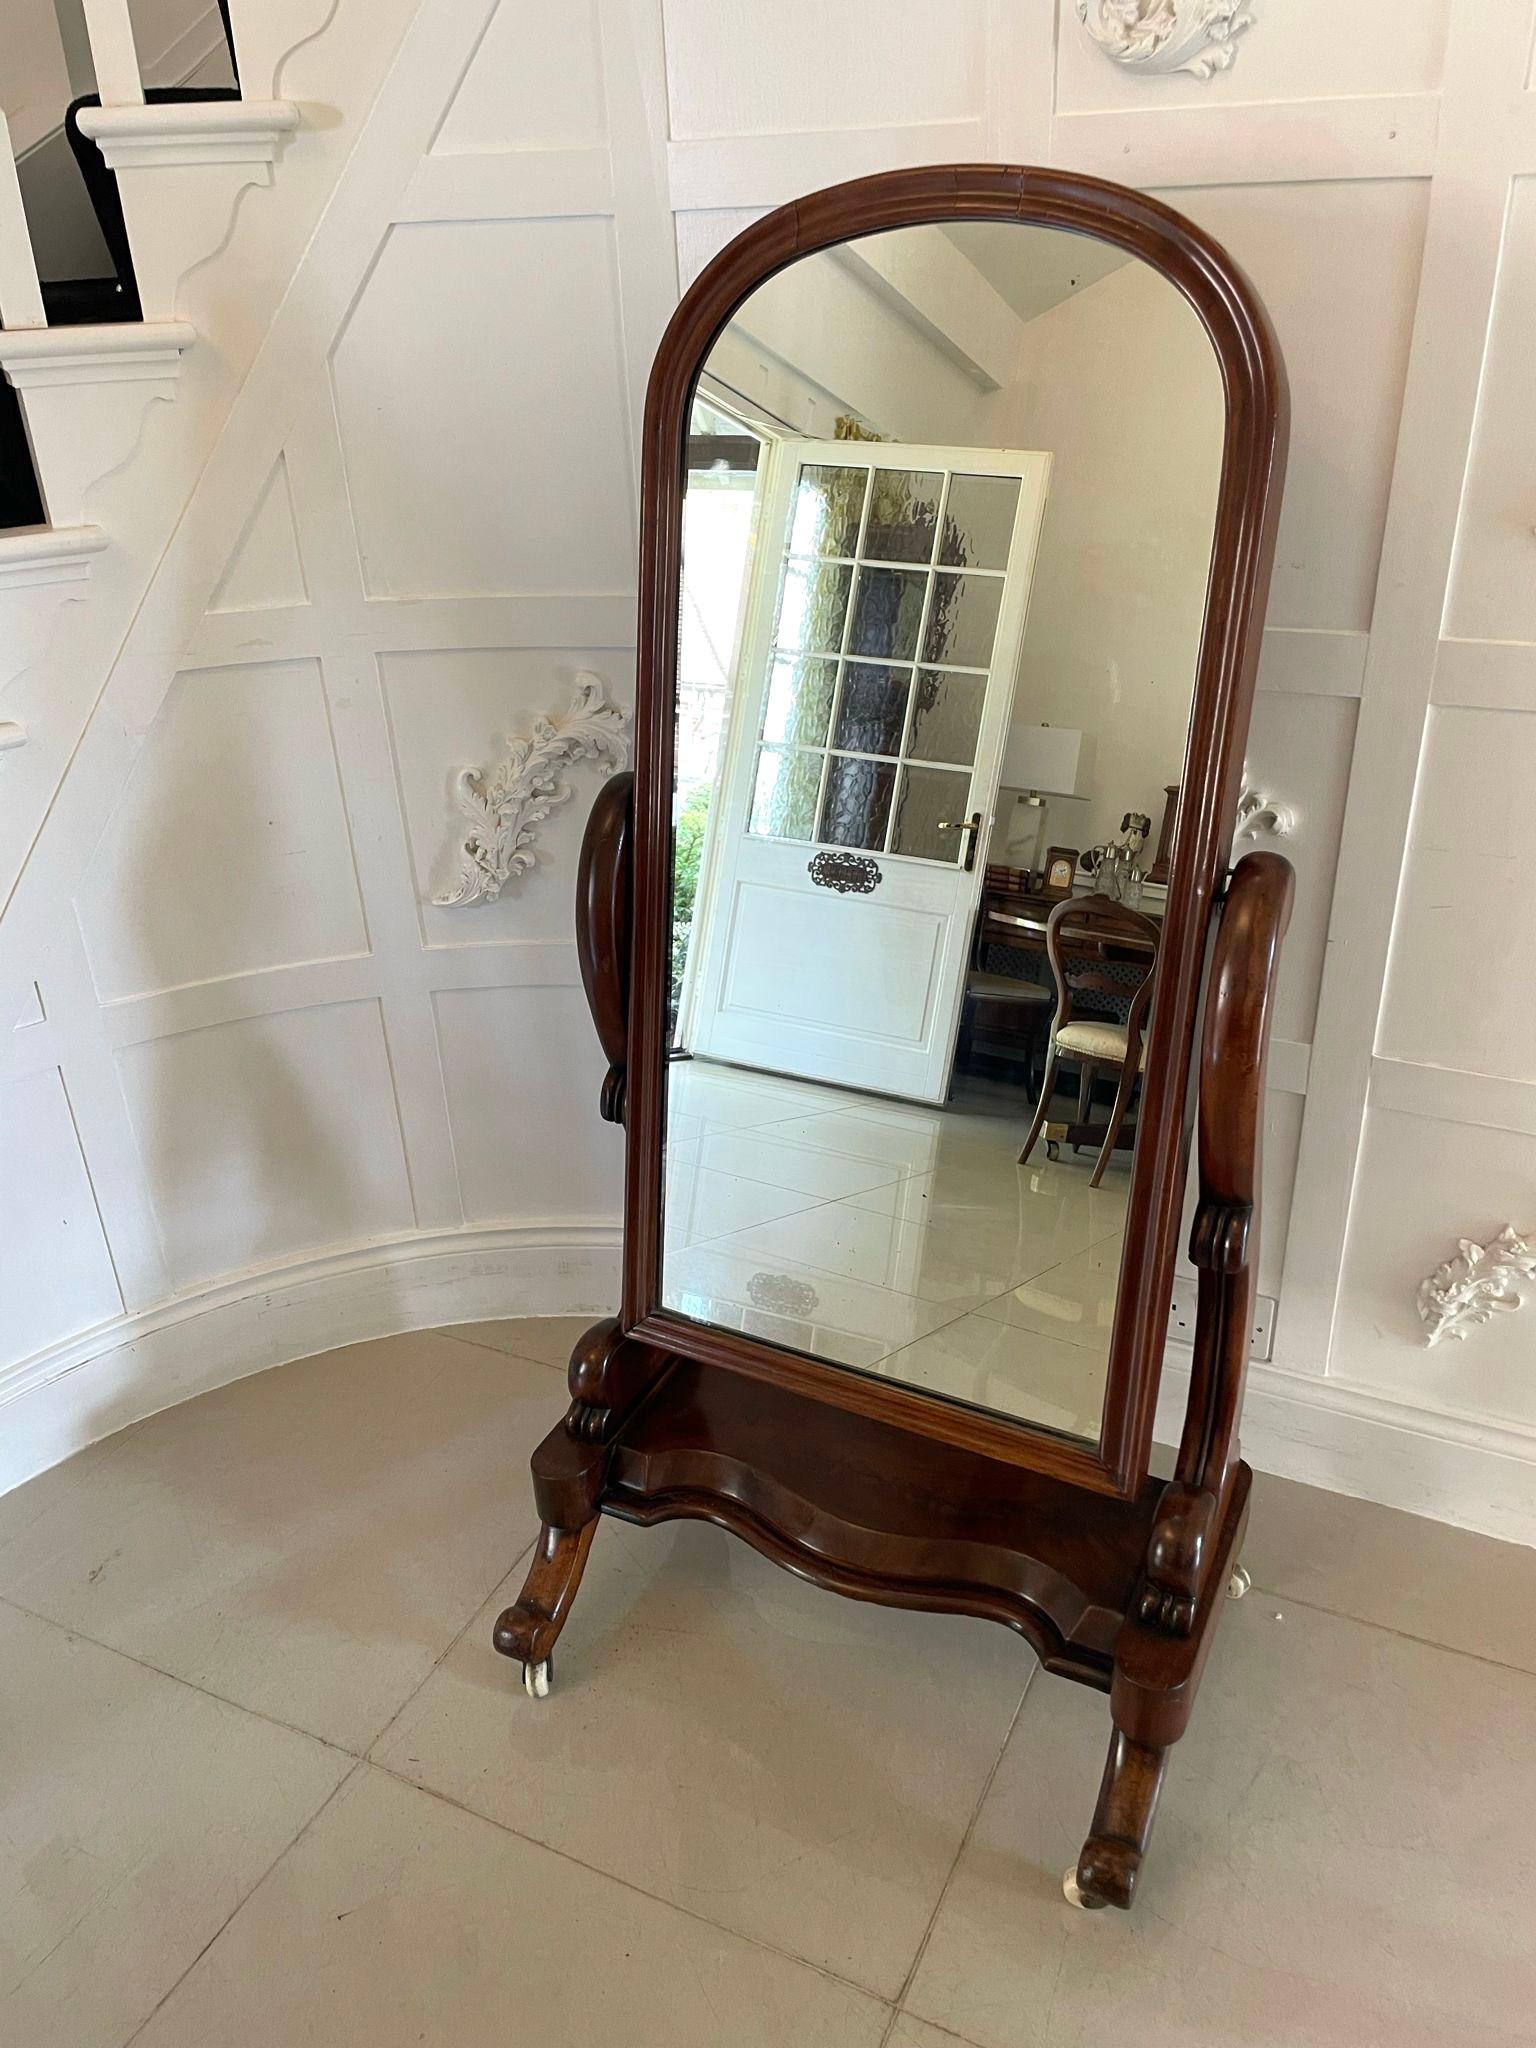 Antique Victorian quality mahogany cheval mirror having the original mirror in an arched top, mahogany frame with a moulded edge supported by scroll shaped supports standing on a serpentine shaped mahogany platform with cabriole legs and scroll feet